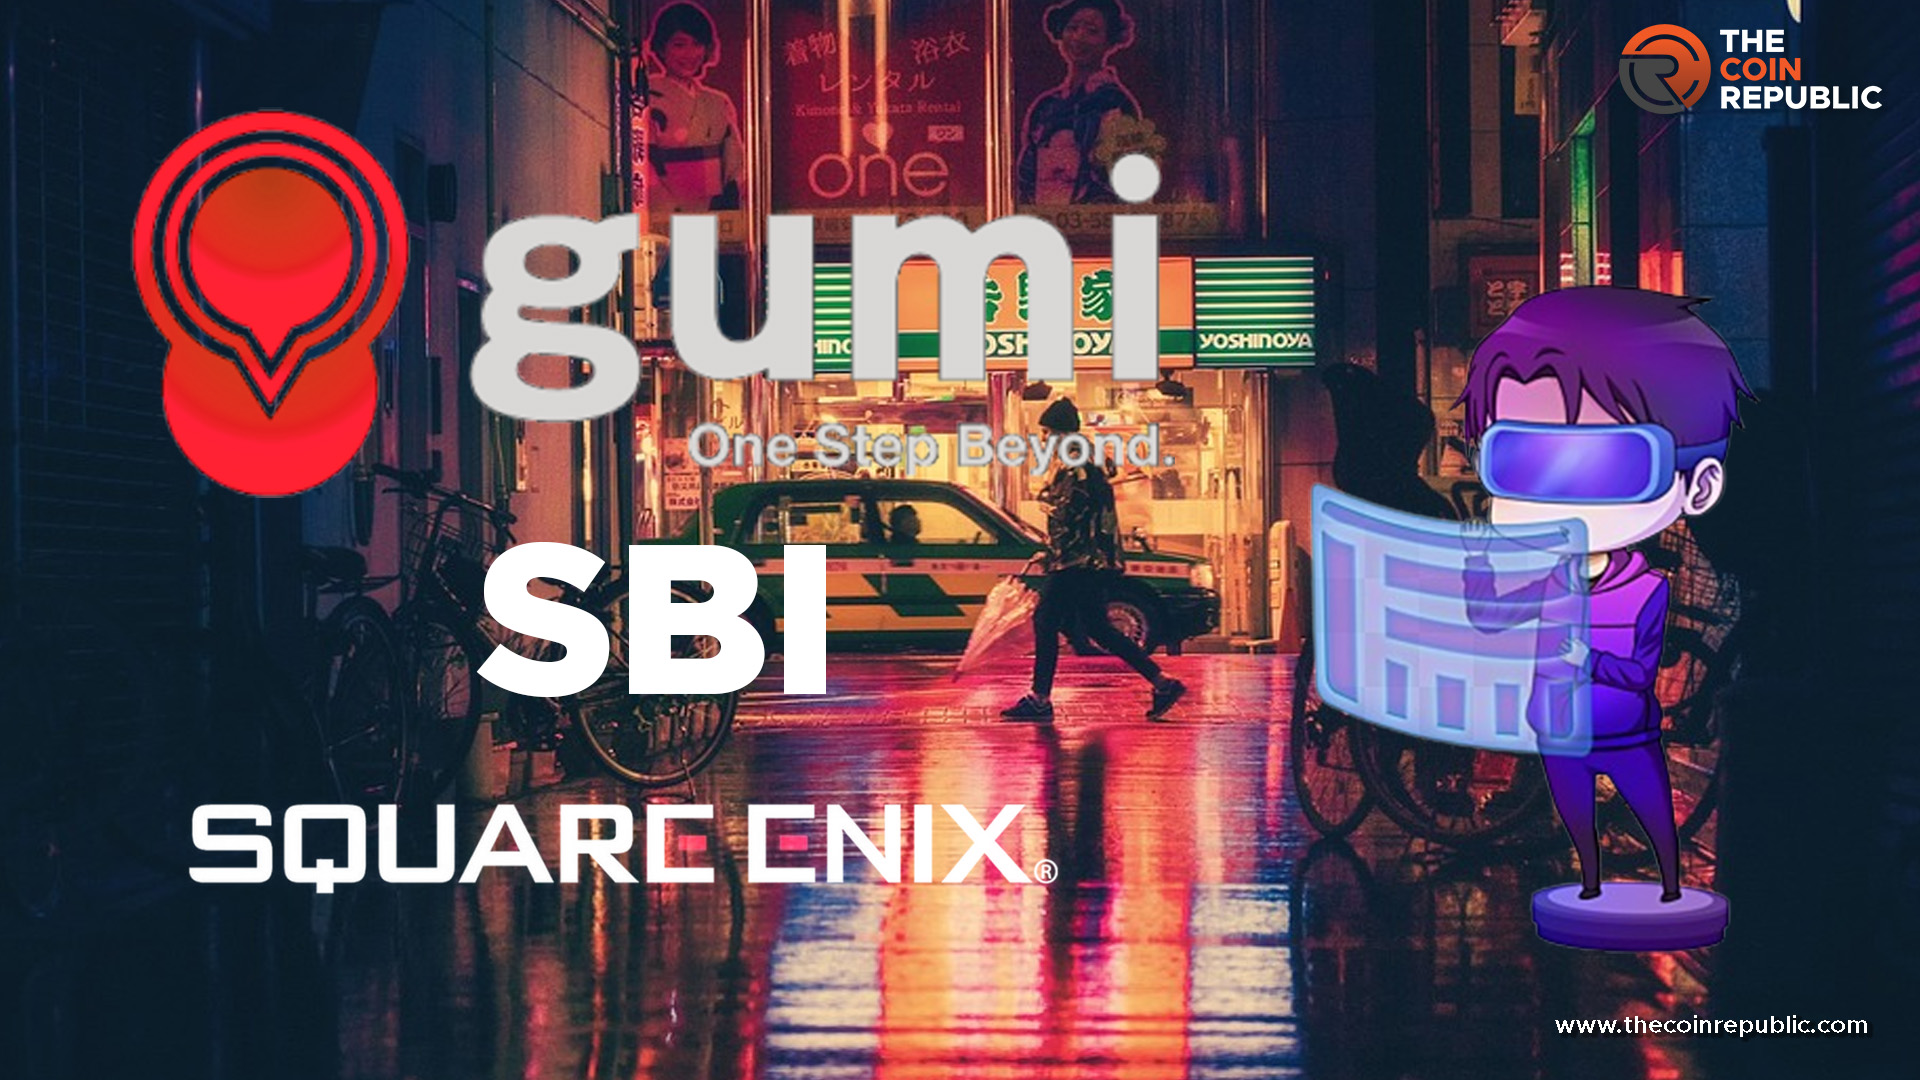 Japan Game Maker Gumi Taps Metaverse With Square Enix and SBI Holdings